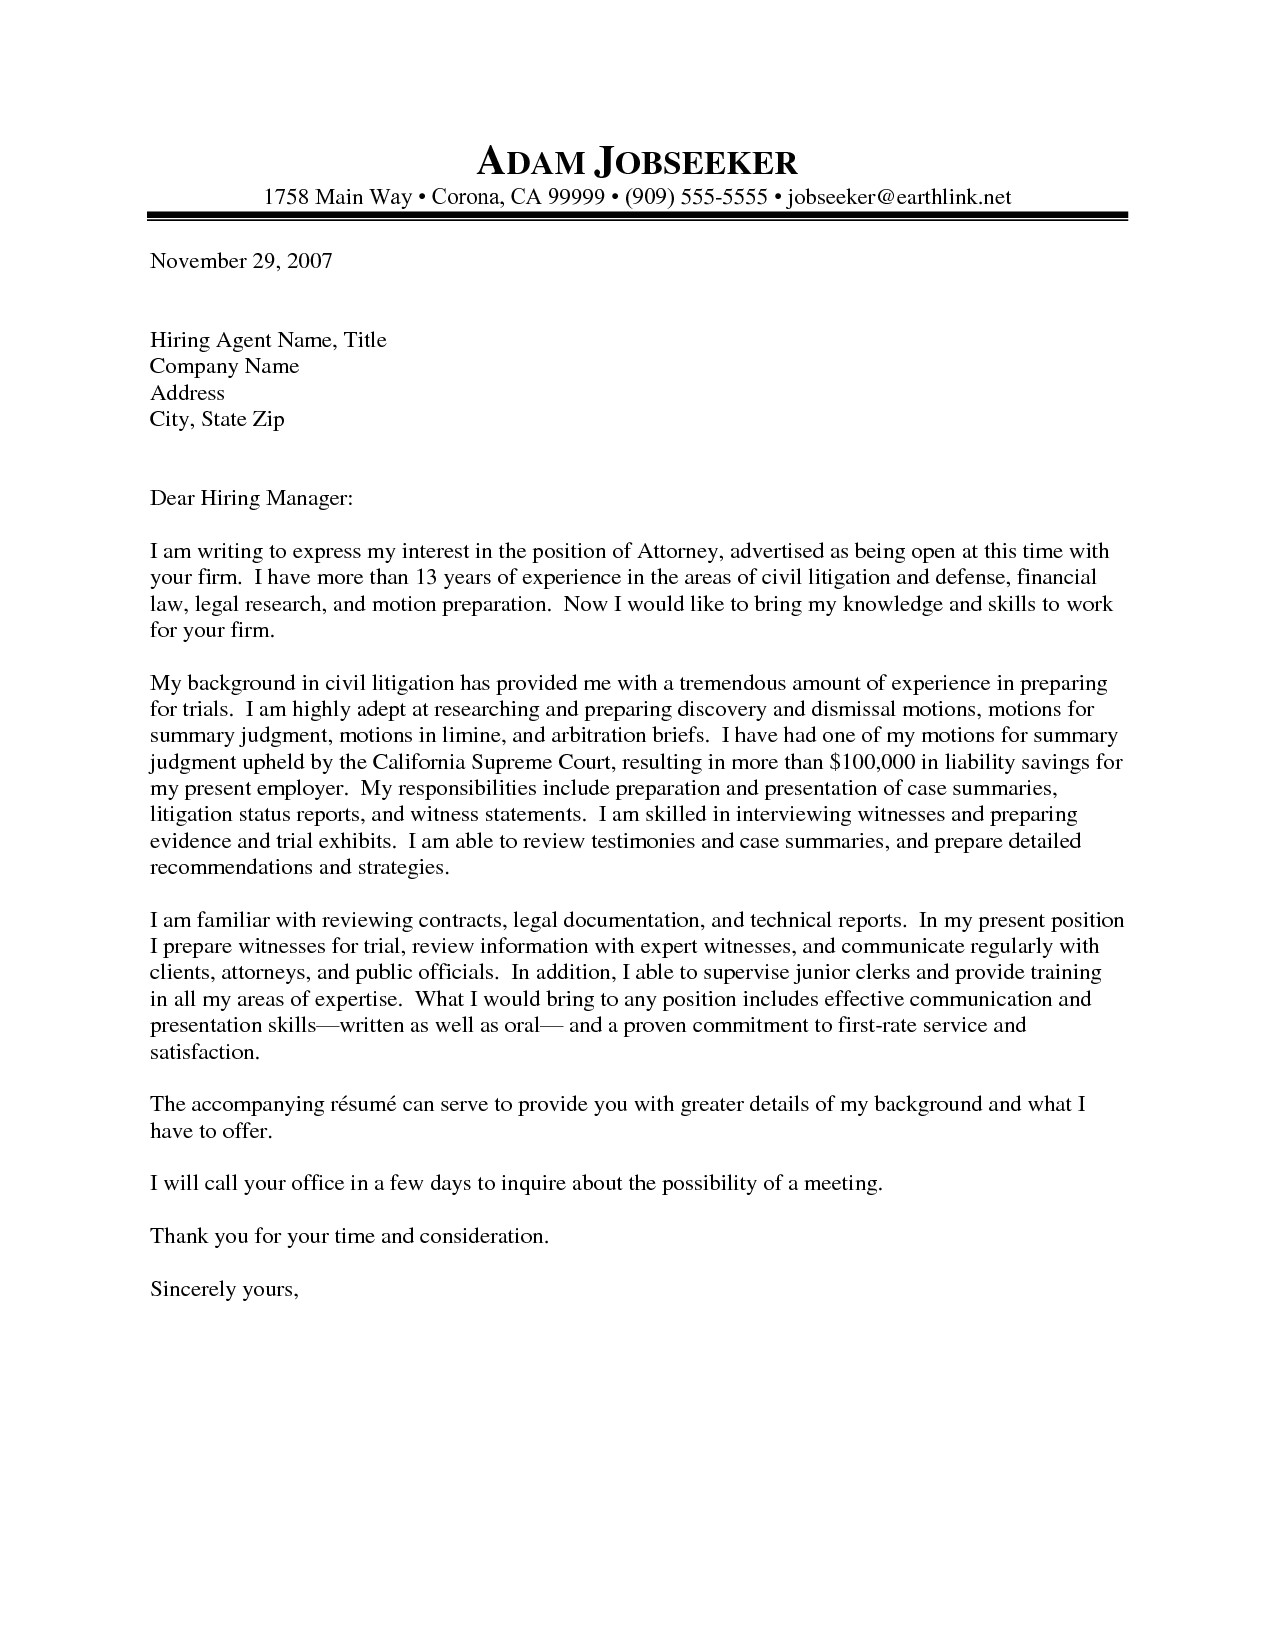 Cover Letter for In House Counsel Position Cover Letter In House Counsel the Letter Sample